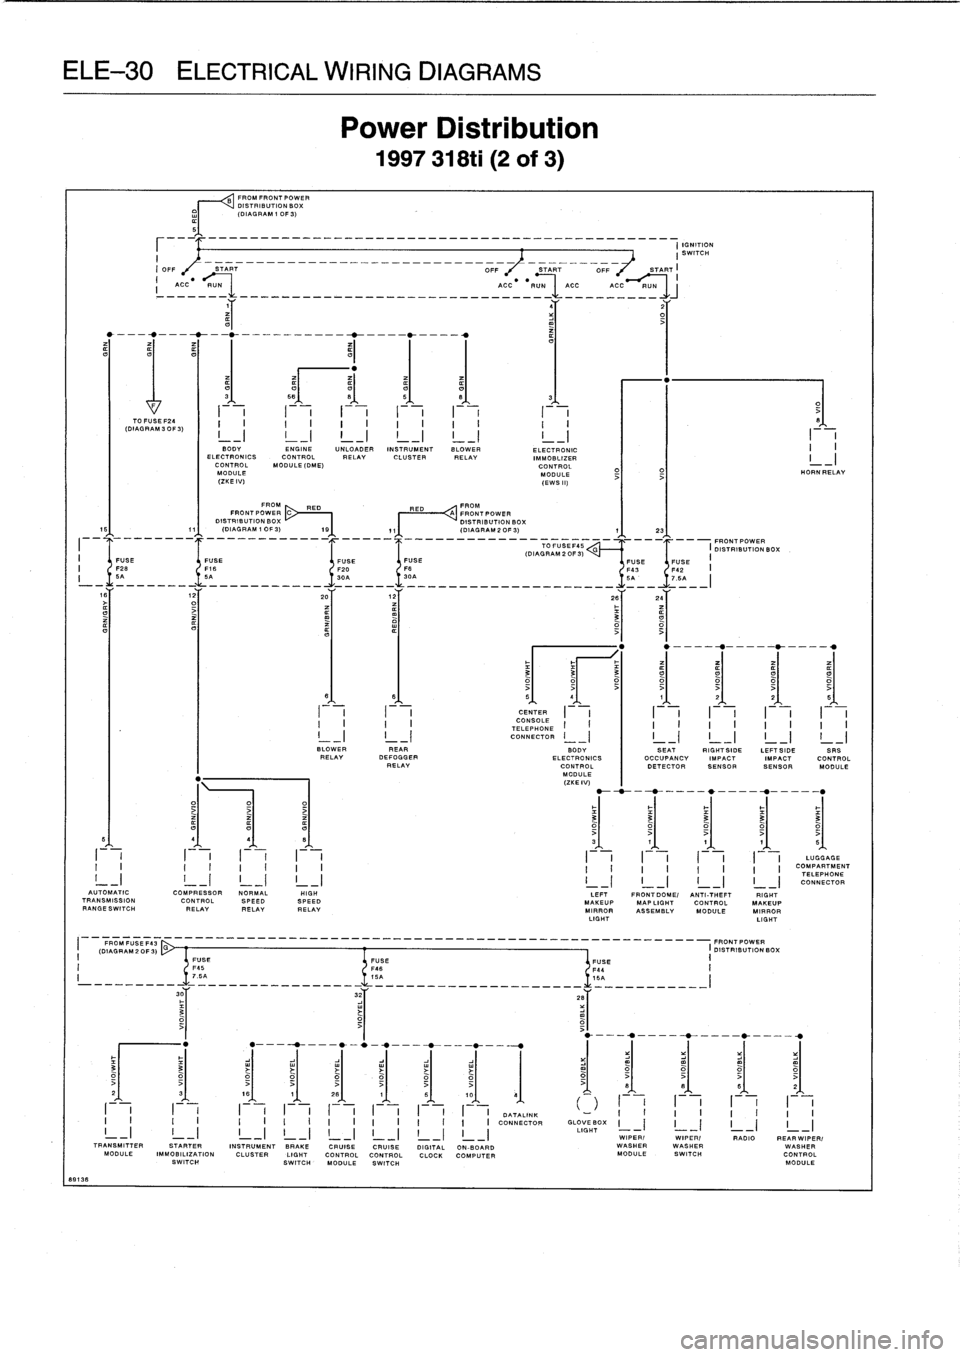 BMW 328i 1995 E36 Owners Guide 
ELE-30
ELECTRICAL
WIRING
DIAGRAMS

I
ACC
-R=_
____-____-______________
ACC
-
RUN

	

ACC
-_-C~

4Y

	

2Y

I

	

I

TO
FUSE
F24
(DIAGRAM
30F
3)

FROM
FRONT
POWER
DISTRIBUTION
BOX
(DIAGRAM
1
0F3)
IGNI